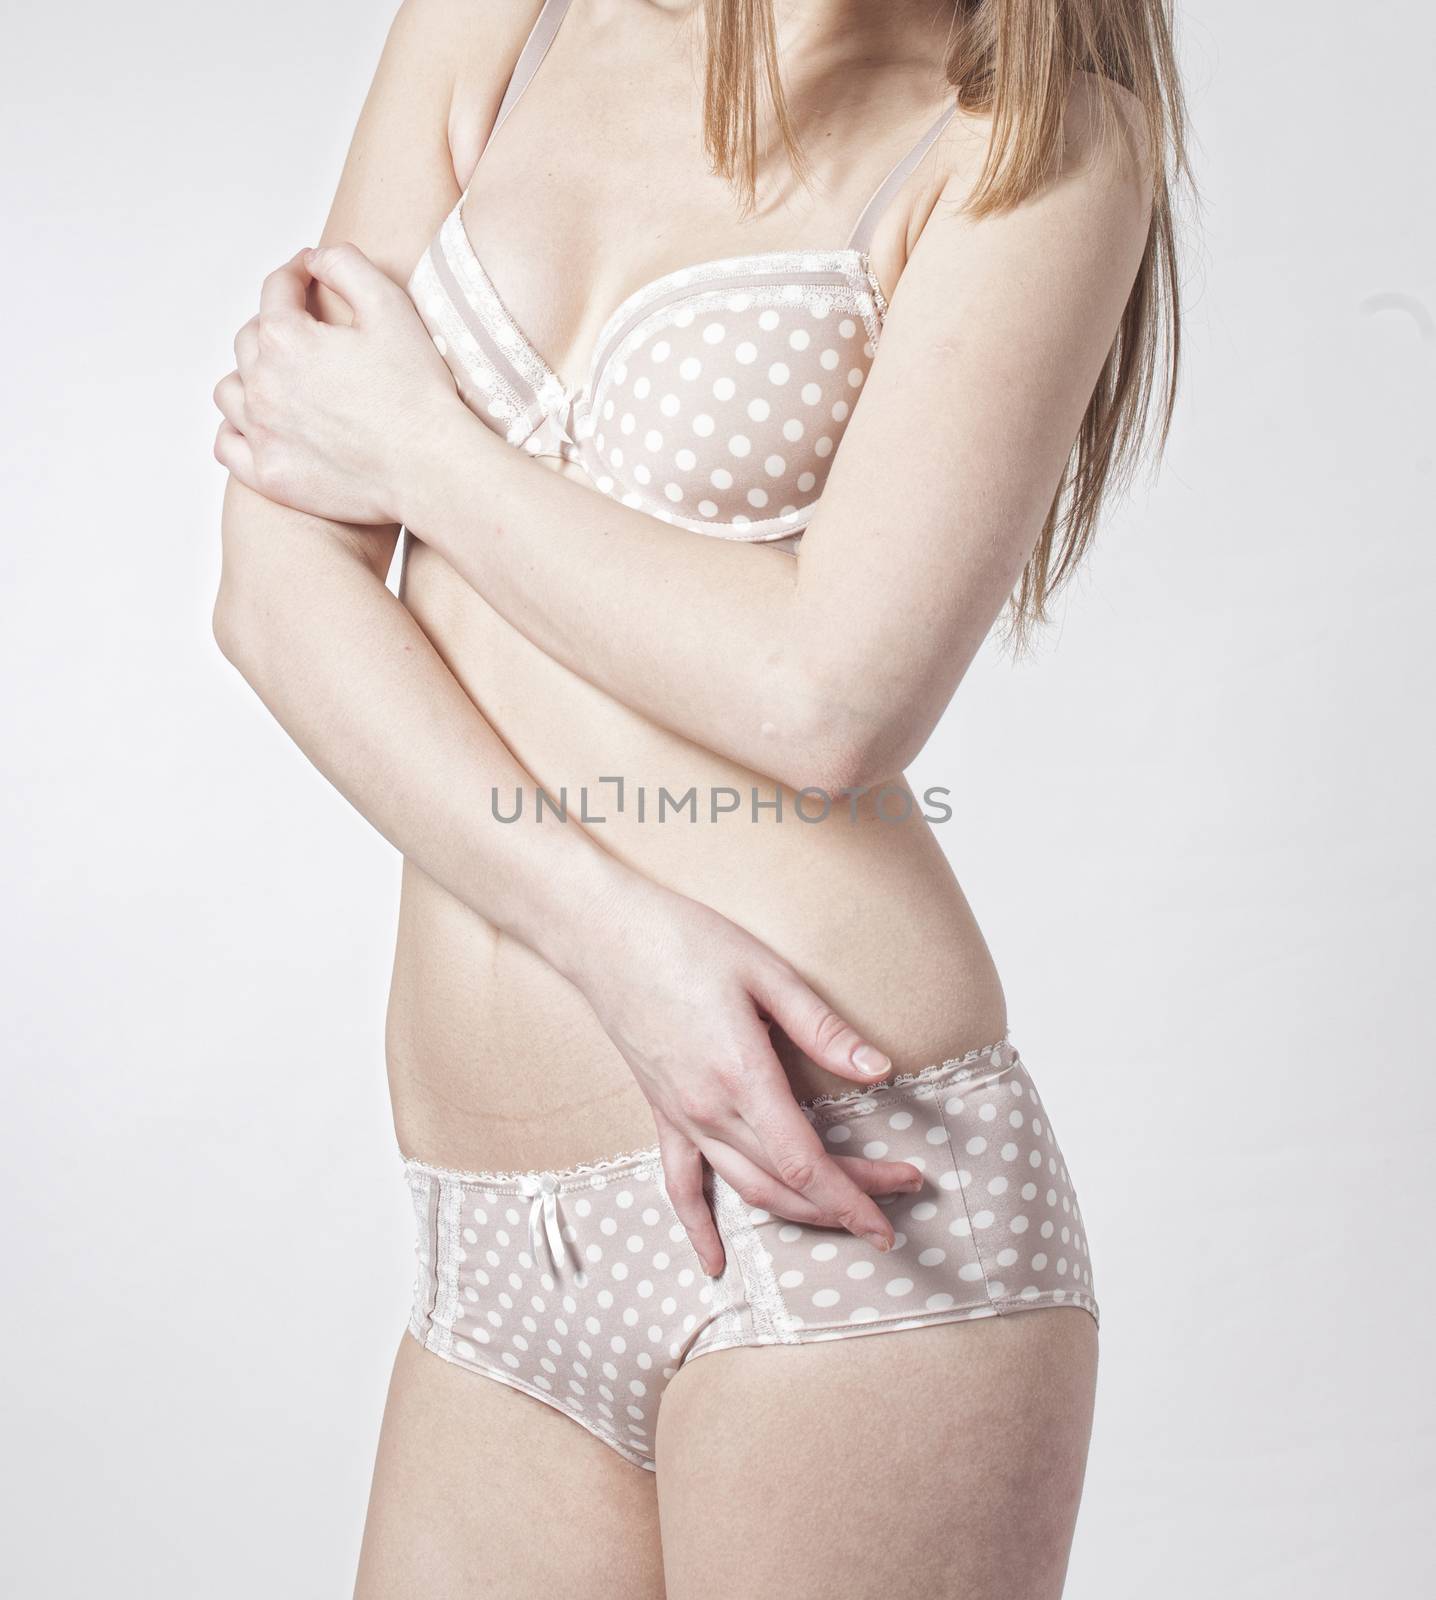 attractive woman dressed bra and panties in studio by xtate